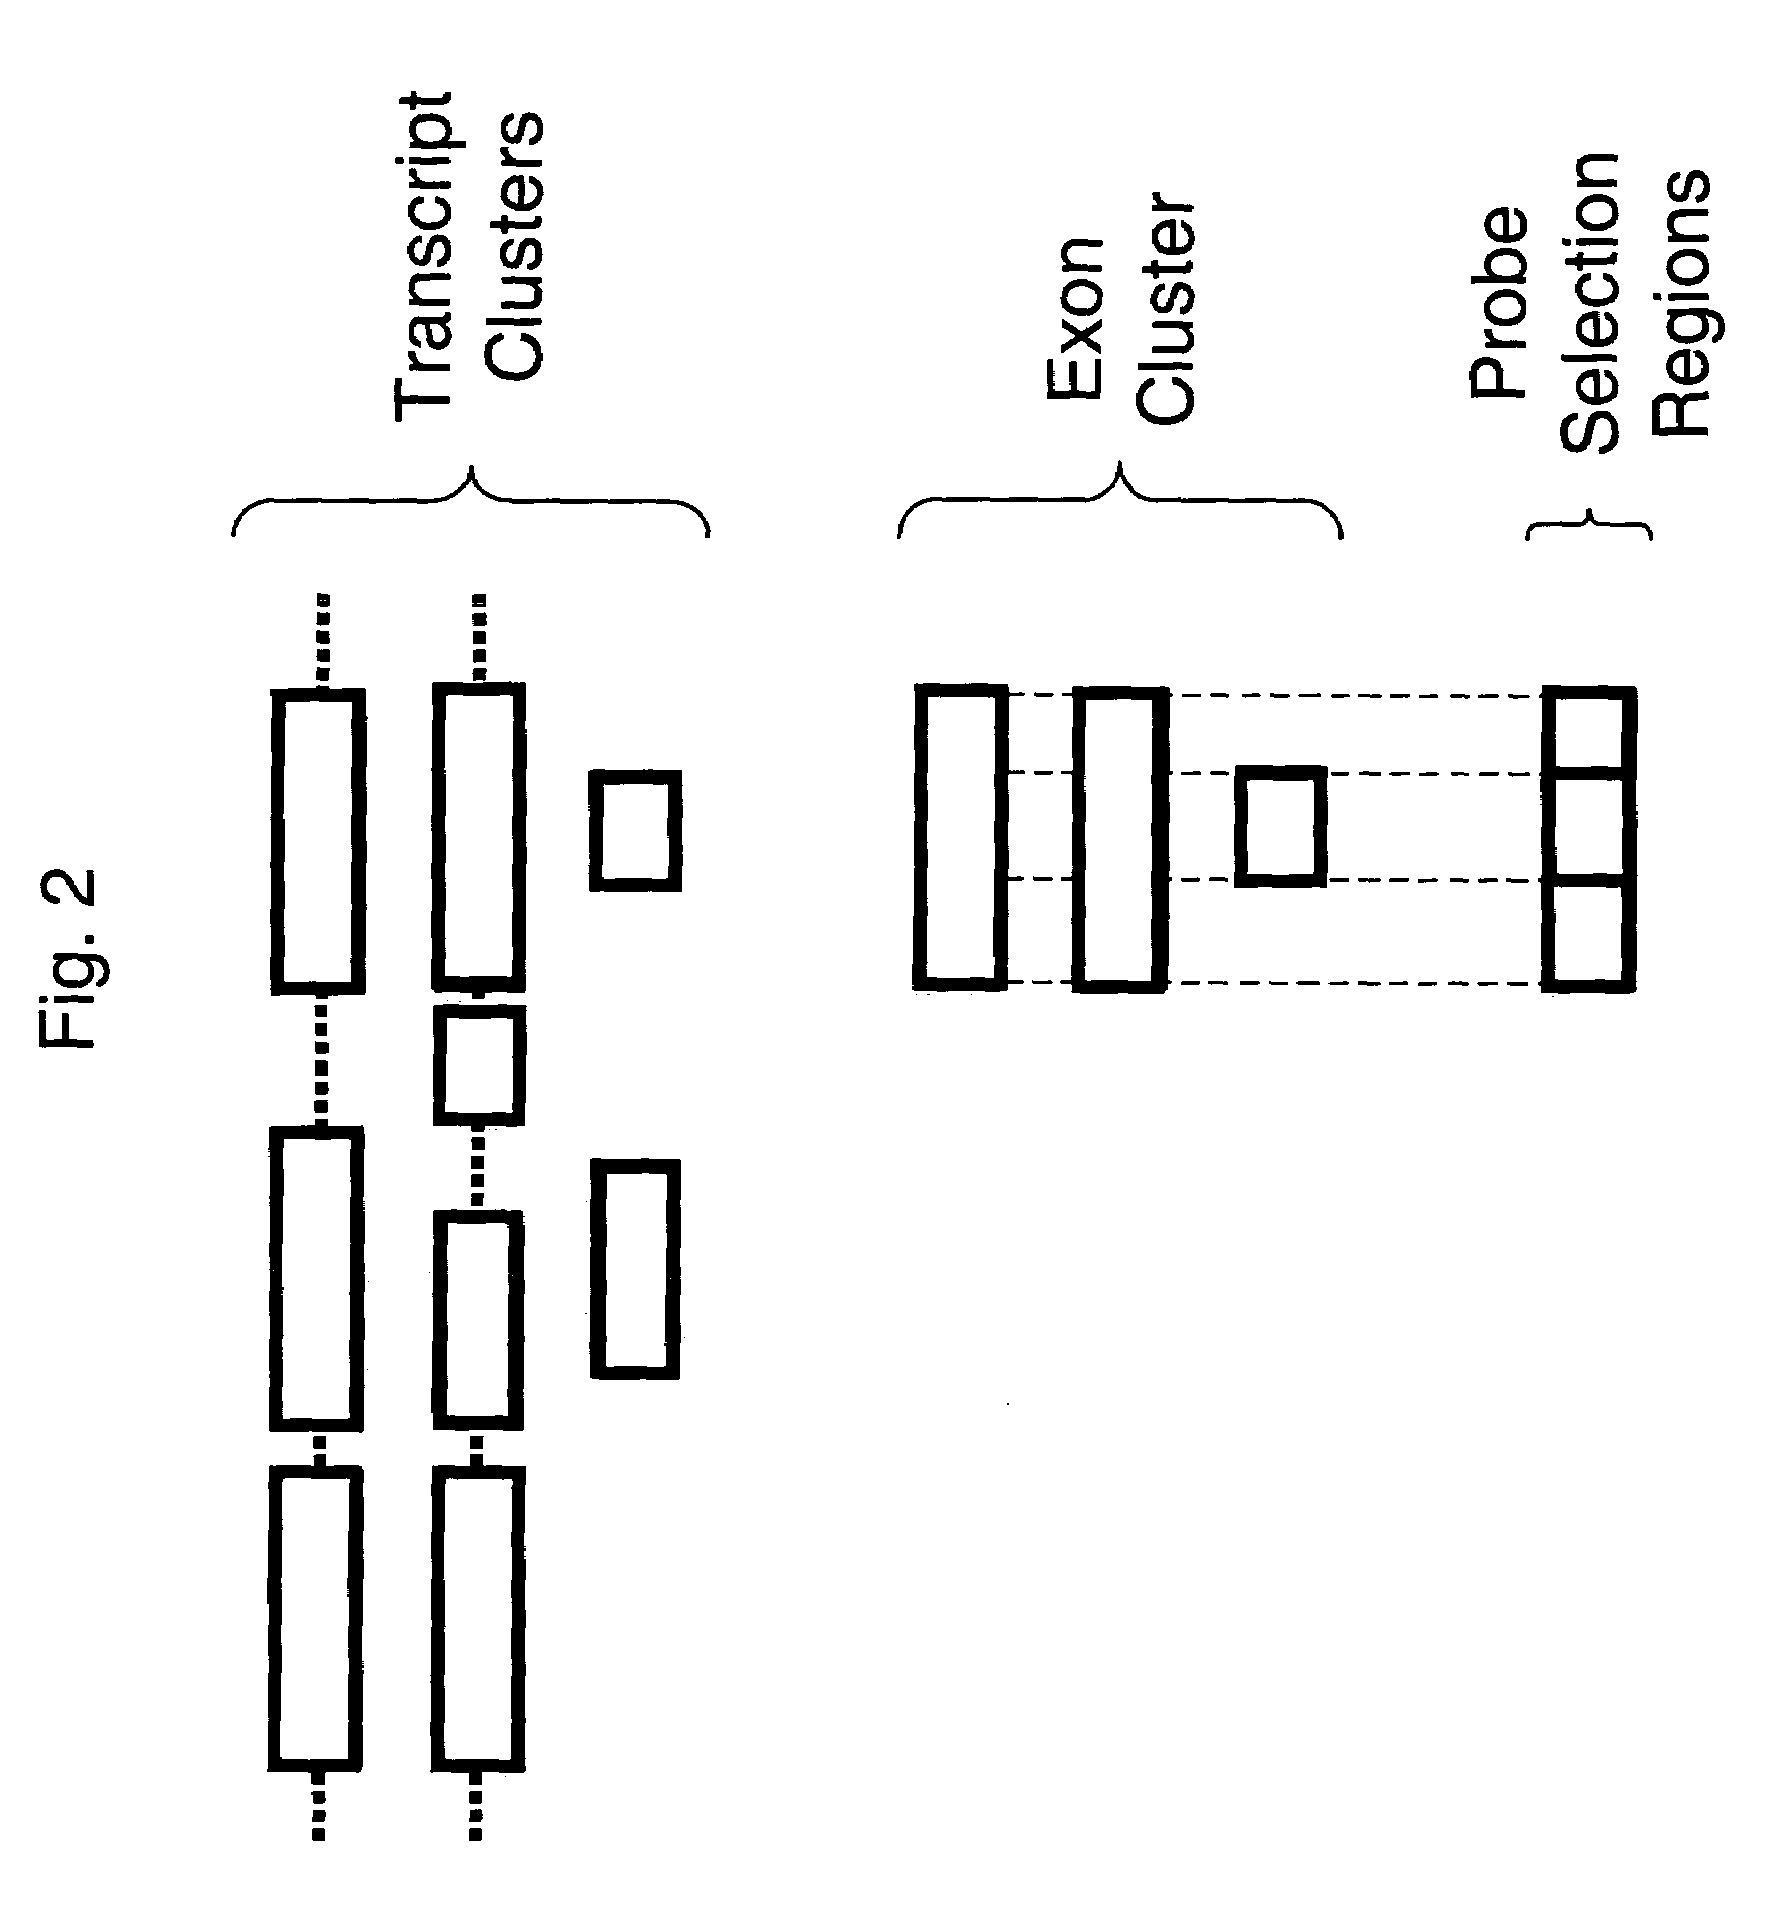 Methods of analysis of alternative splicing in mouse